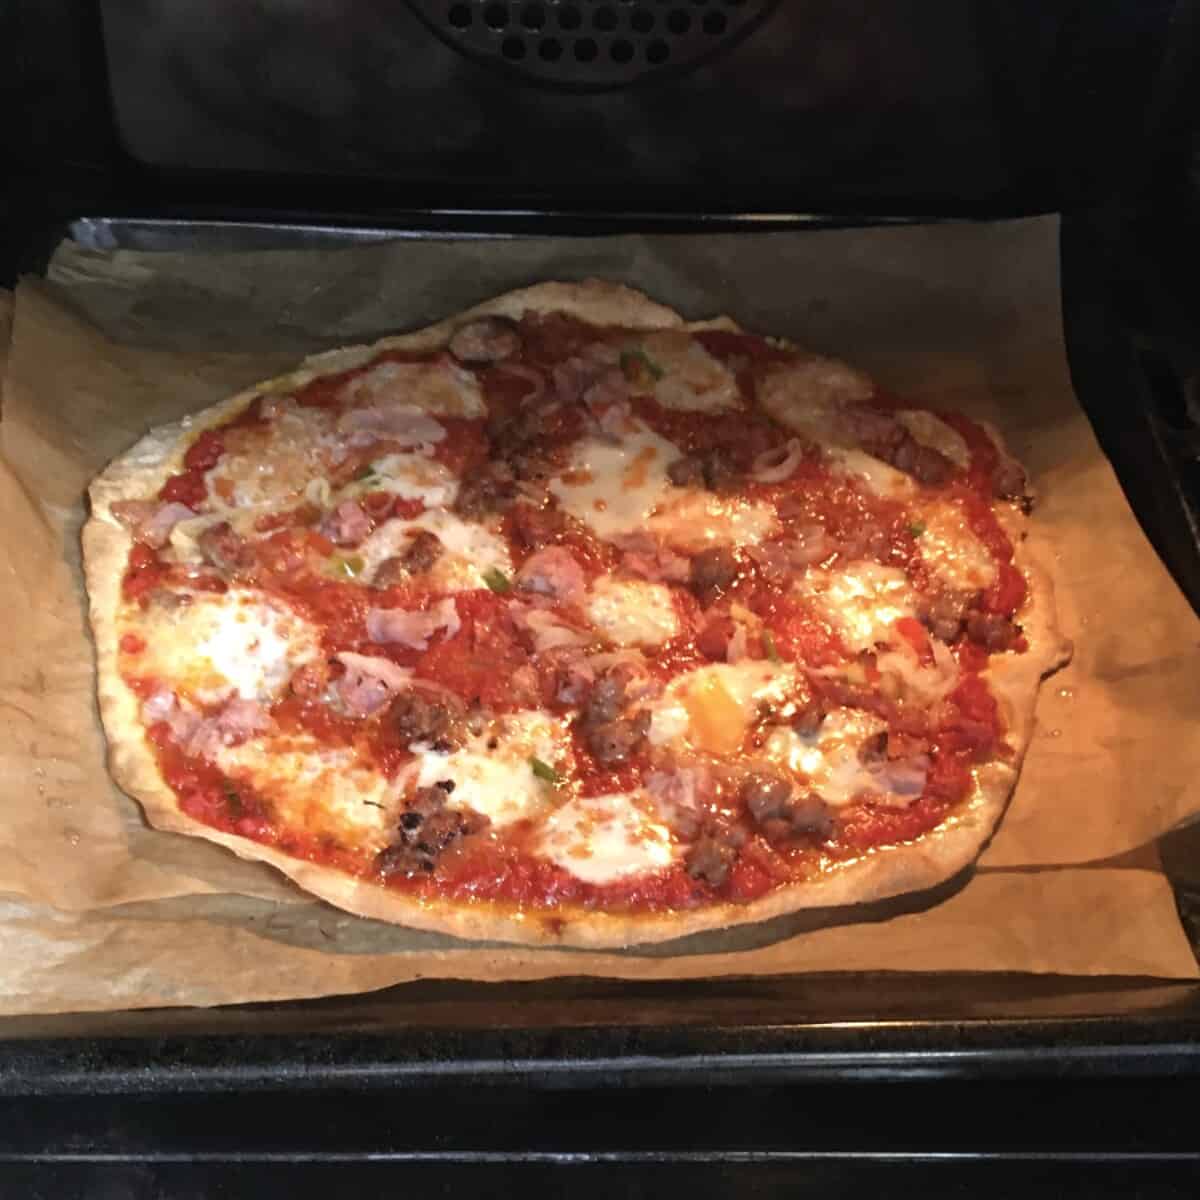 A cracker thin pizza in the oven on 2 pieces of parchment paper in the oven grill pan in the hottest part of the oven (oven floor in this case)